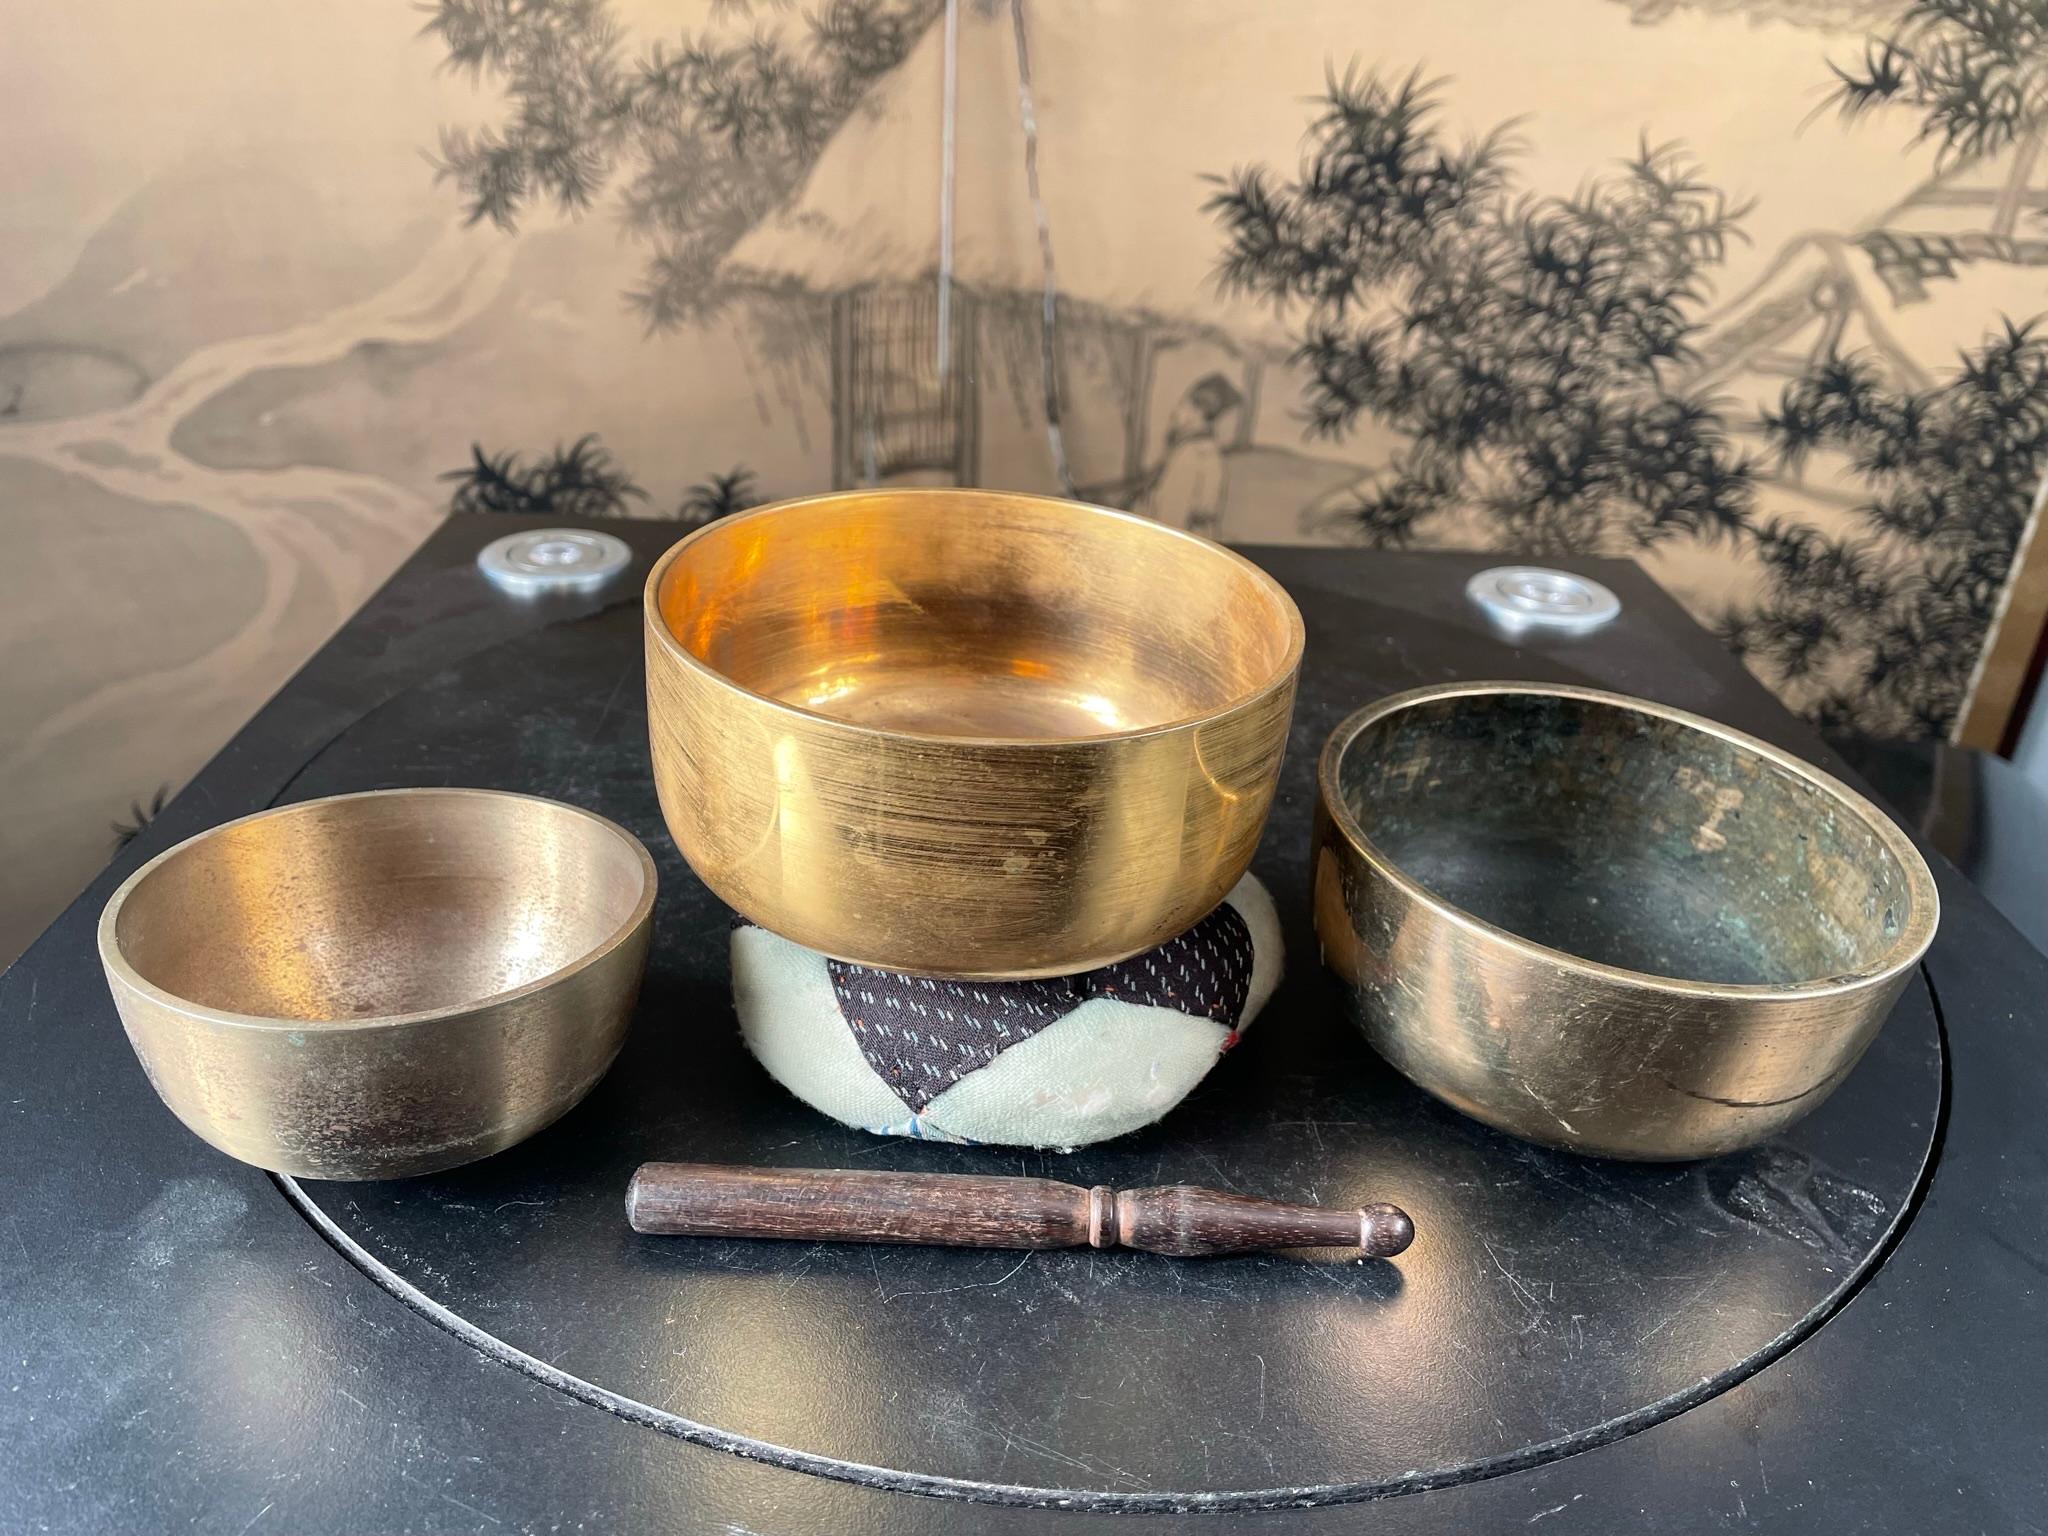 From Japan, a very nice collection of three (3) small to medium scale mid-20th century bronze temple meditation bells with handmade cushion and hardwood striker set.

Serene resonating sound guaranteed to please you.

Dimensions: Largest bell 4